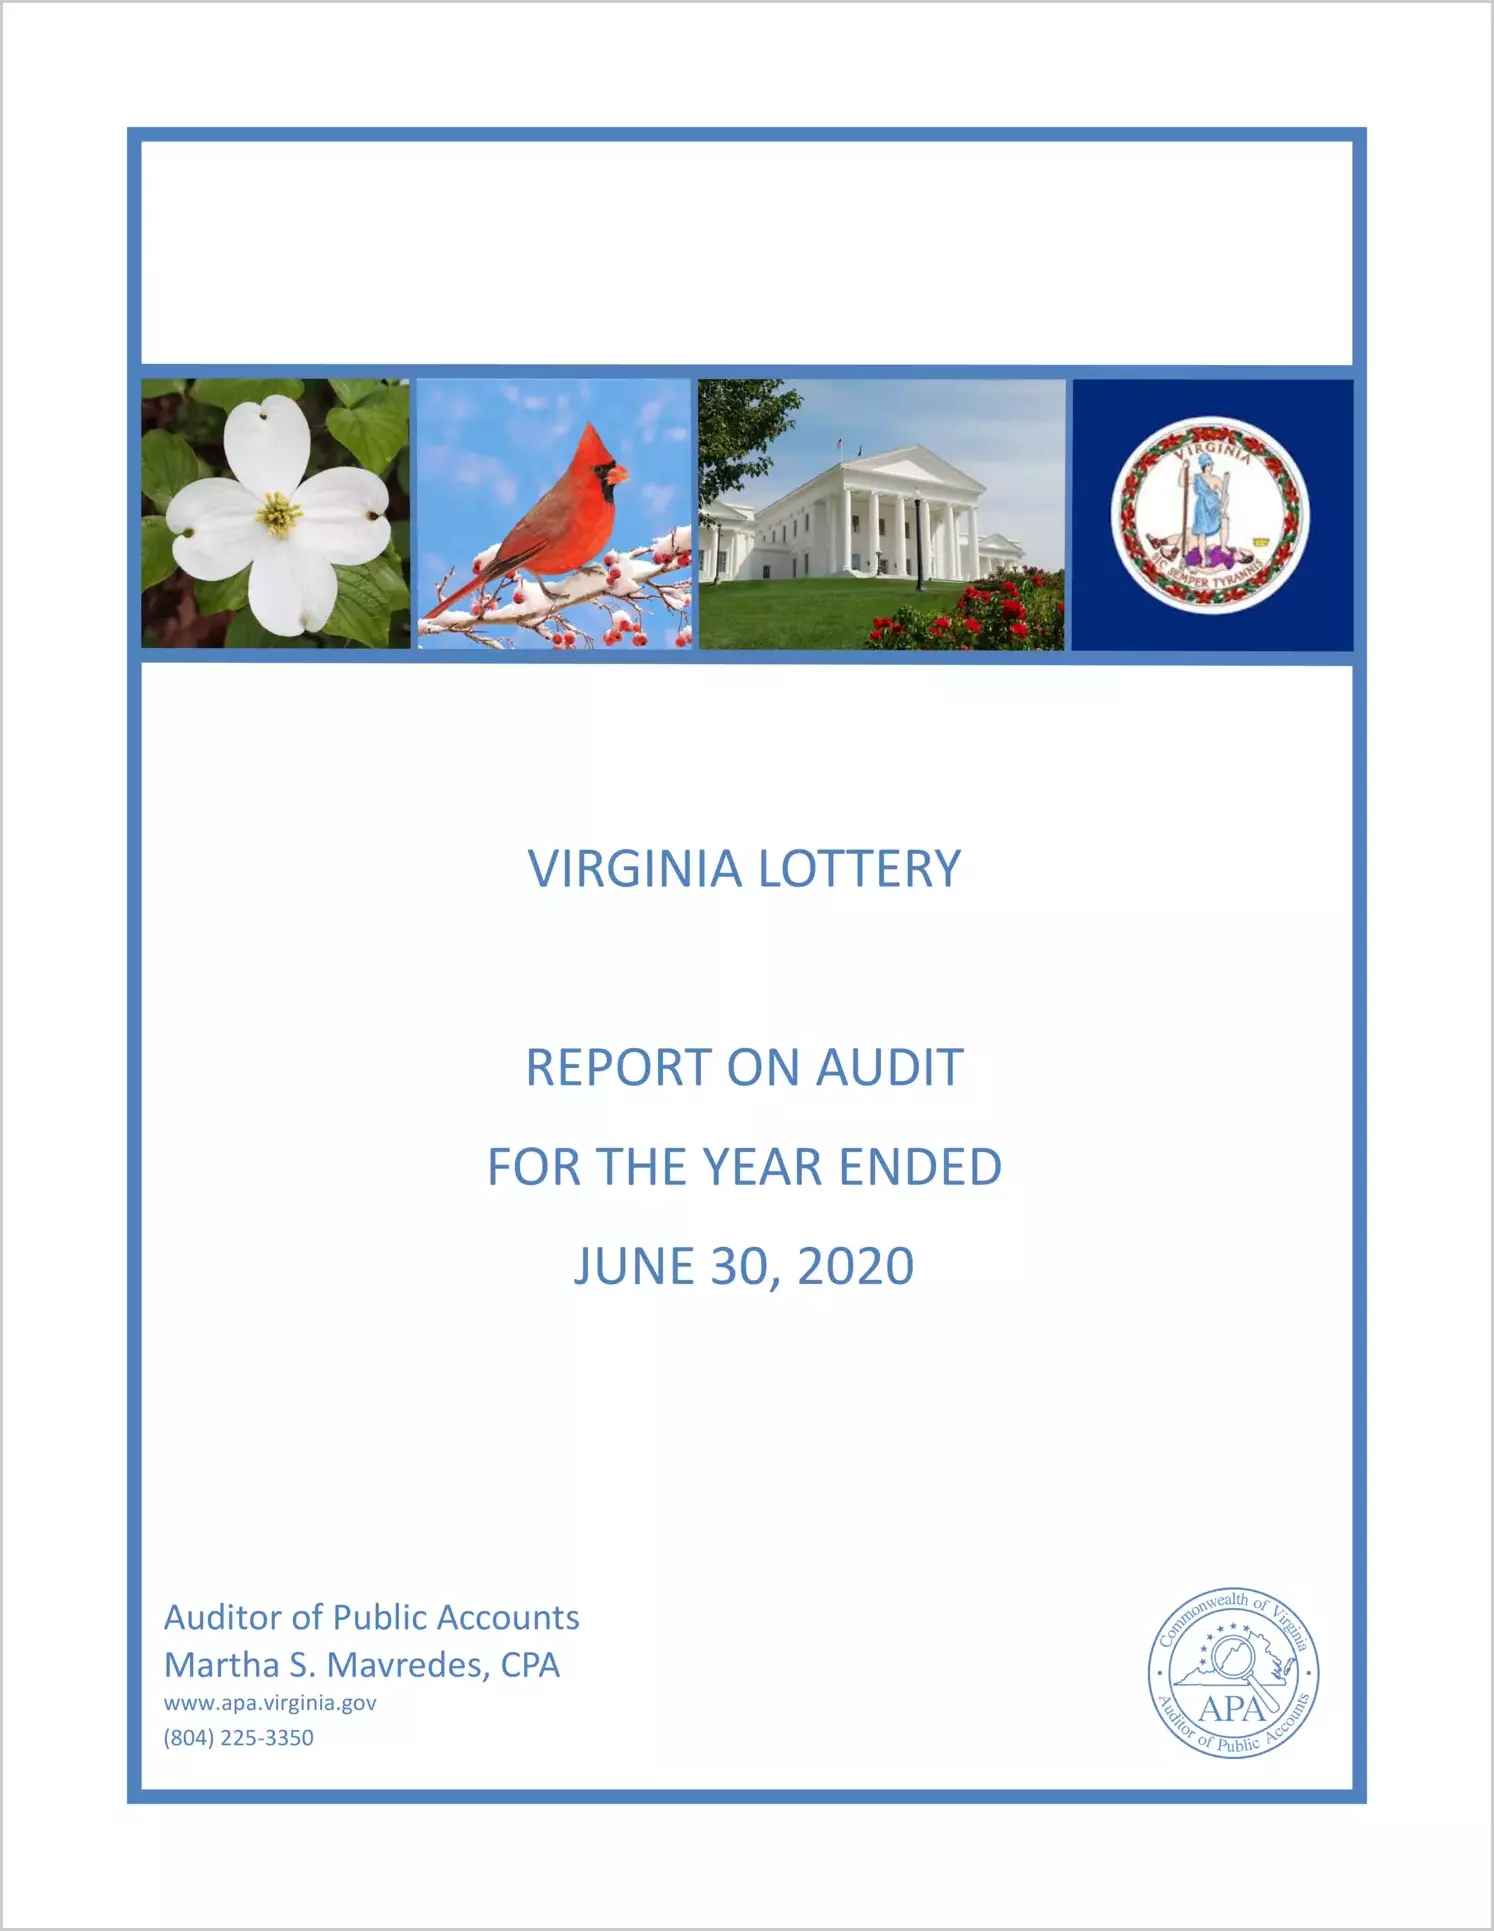 Virginia Lottery for the year ended June 30, 2020